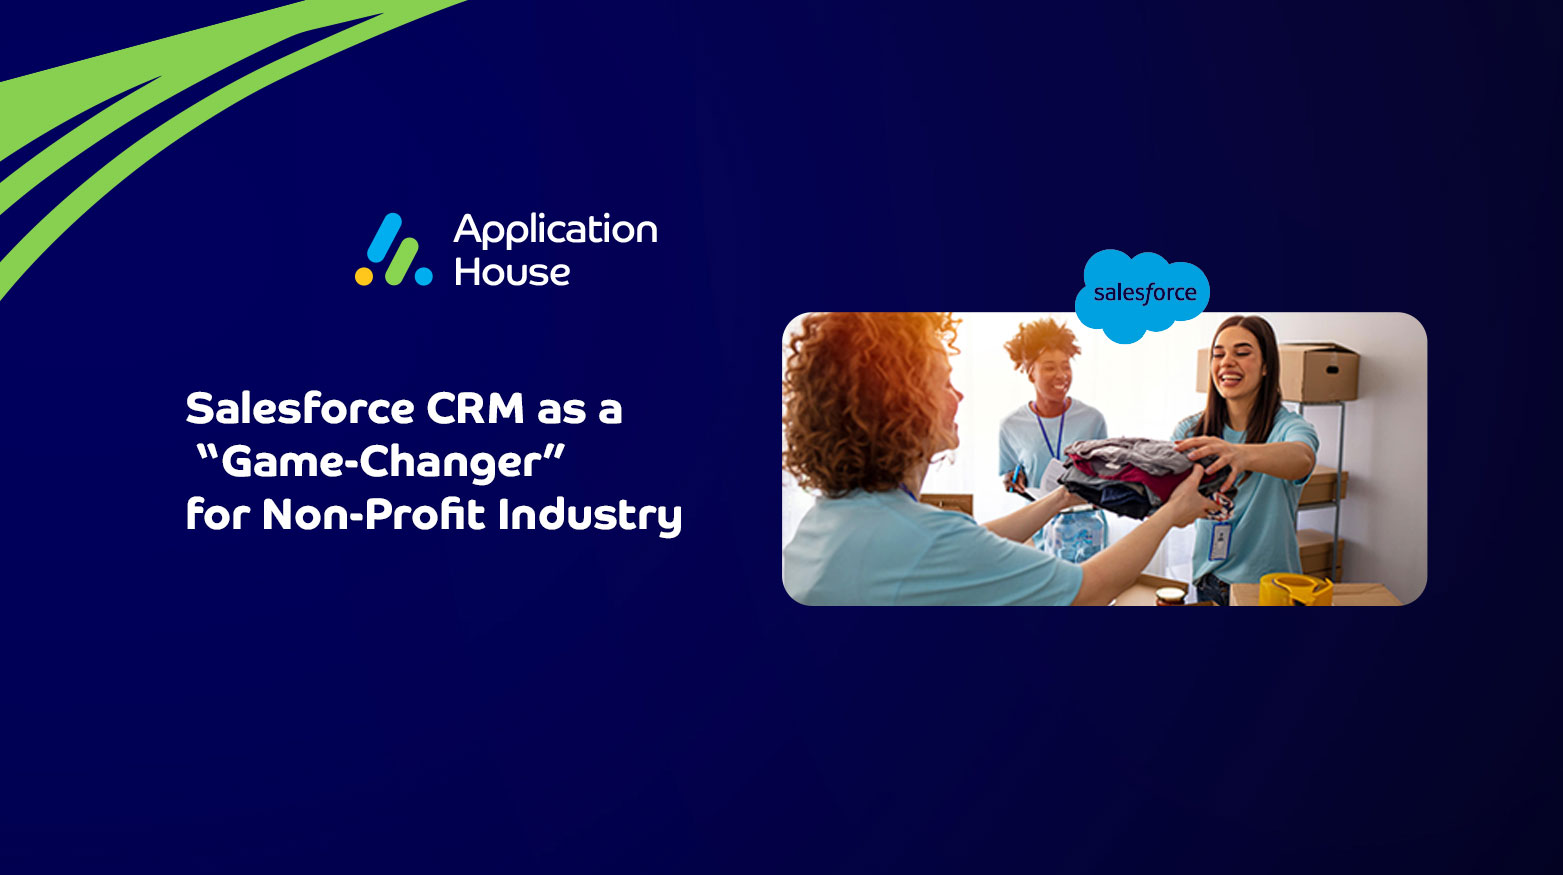 Salesforce CRM as a “Game-Changer” for Non-Profit Industry